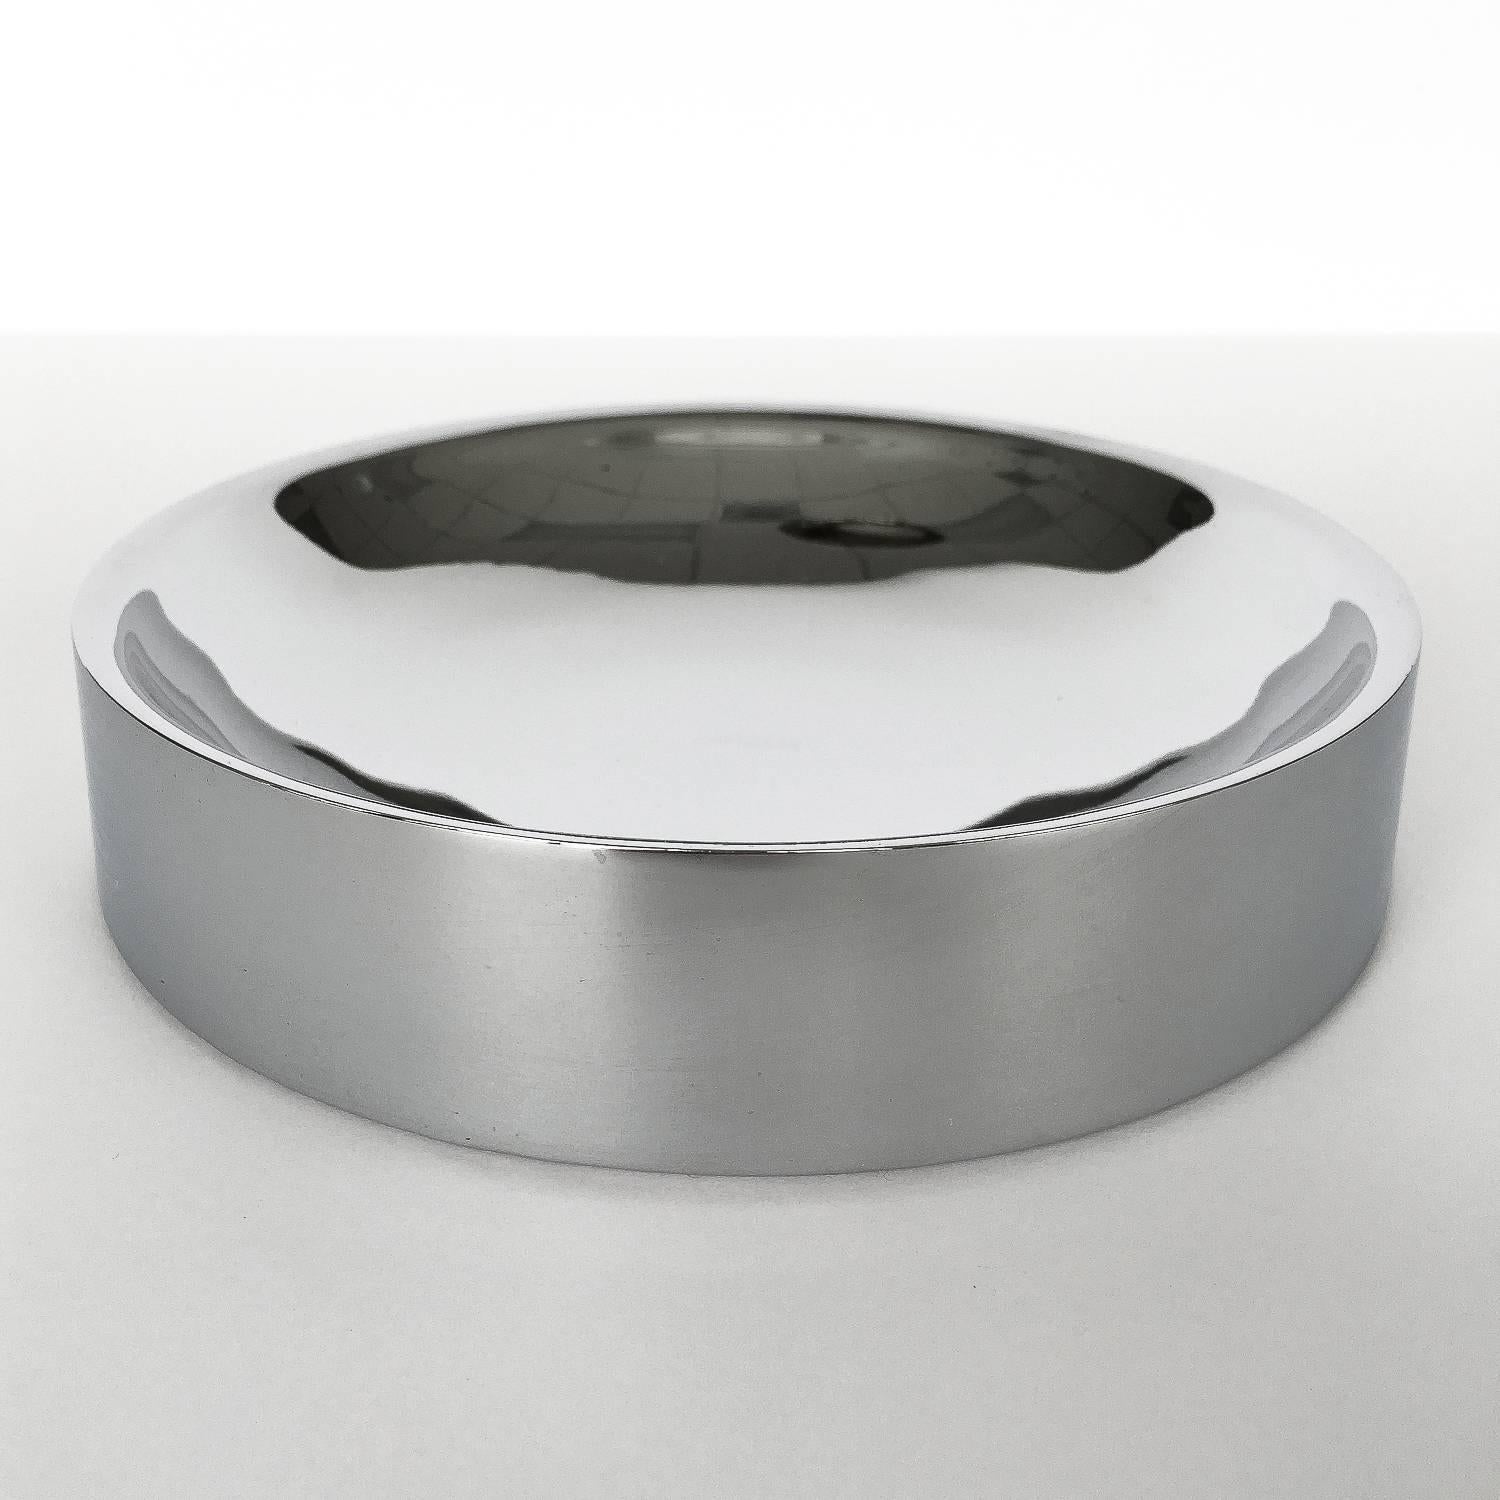 A 1970s chrome catchall bowl by TSAO Designs. Polished chrome minimal / modernist design by Warren Arthur & Mai Tsao for TSAO Designs, a well-known high concept design shop in New Canaan, CT in the 1960s-1980s. Felt bottom. Unmarked.